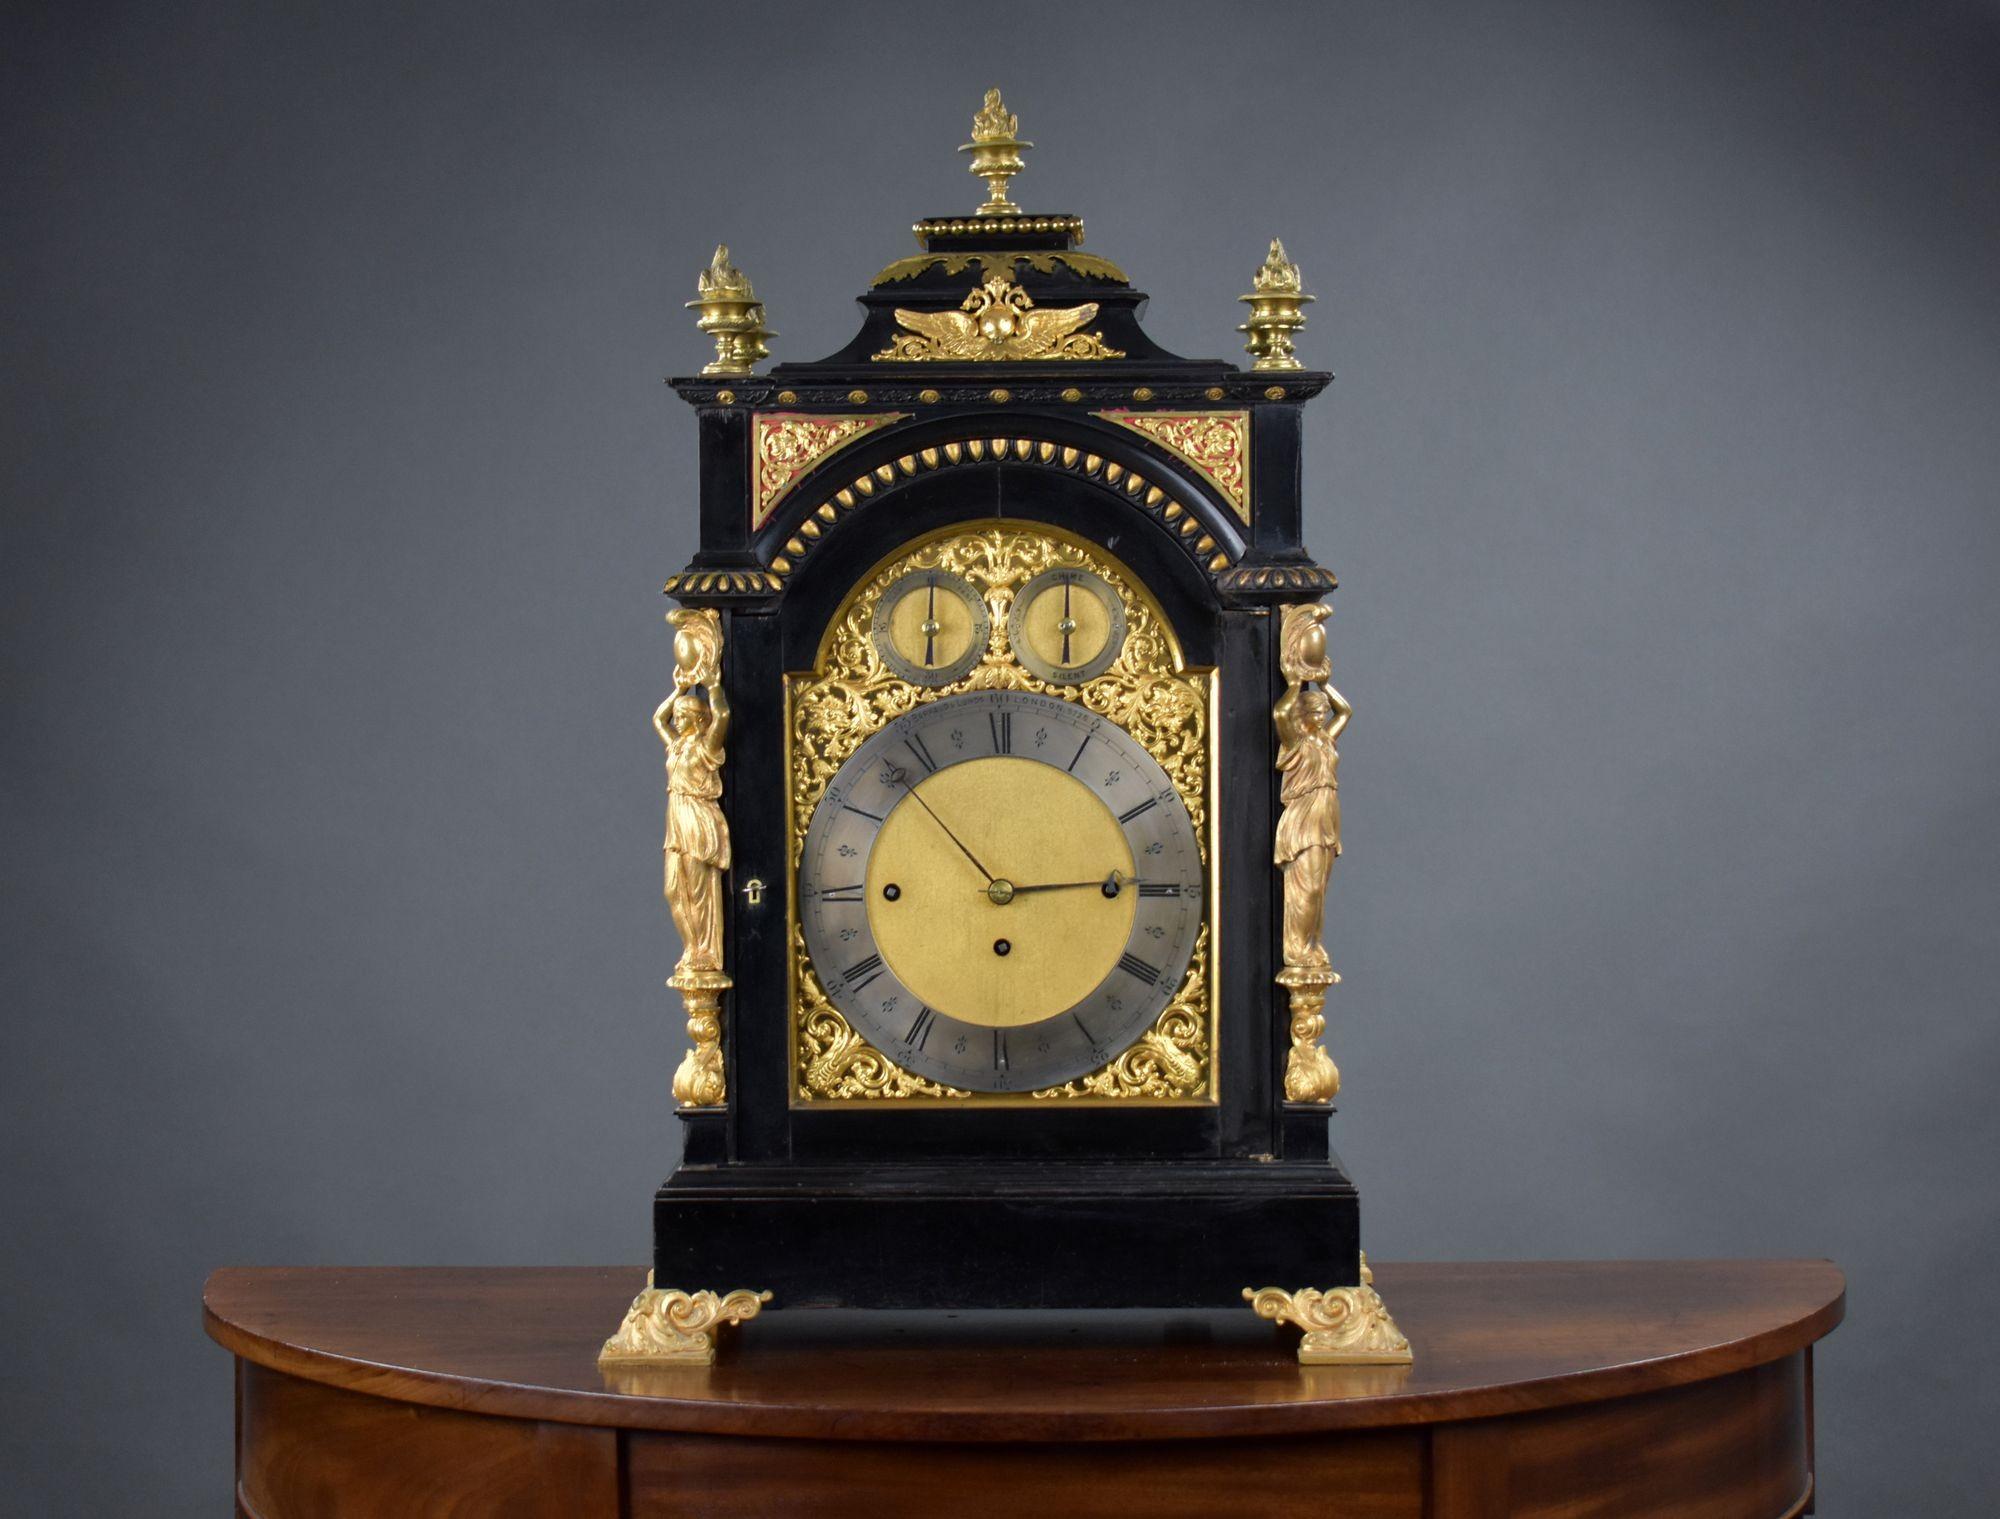 For sale is a fine quality Victorian ebonised bracket clock by Barraud & Lunds, London. The clock features original ormolu finials and mounts throughout, having gilt spandrels, an engraved silvered dial with Roman numerals, original hands and